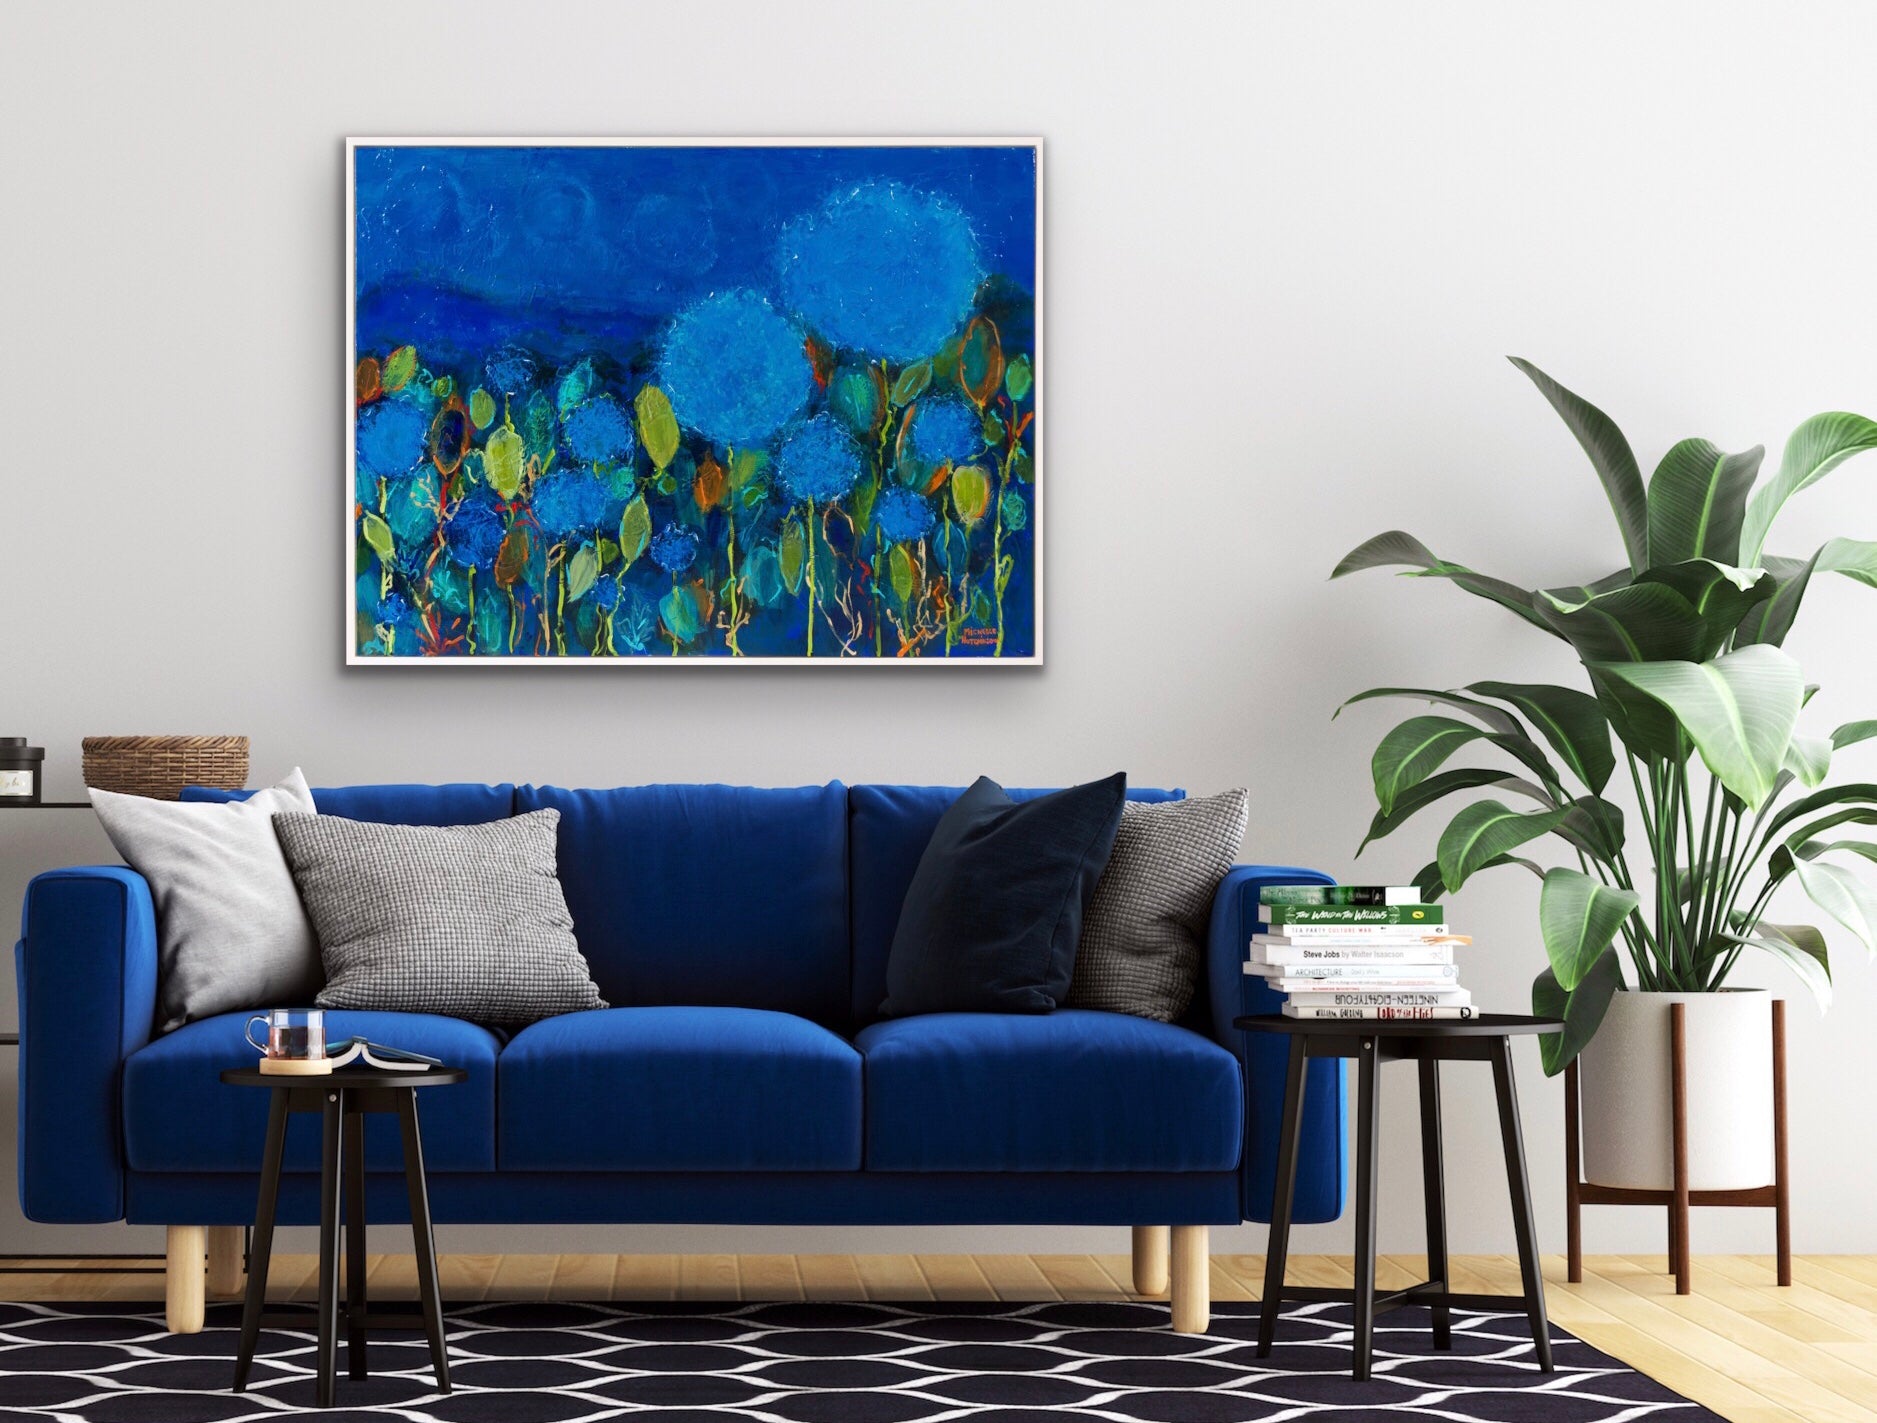 Predominantly blue floral painting shown above a blue velvet sofa.